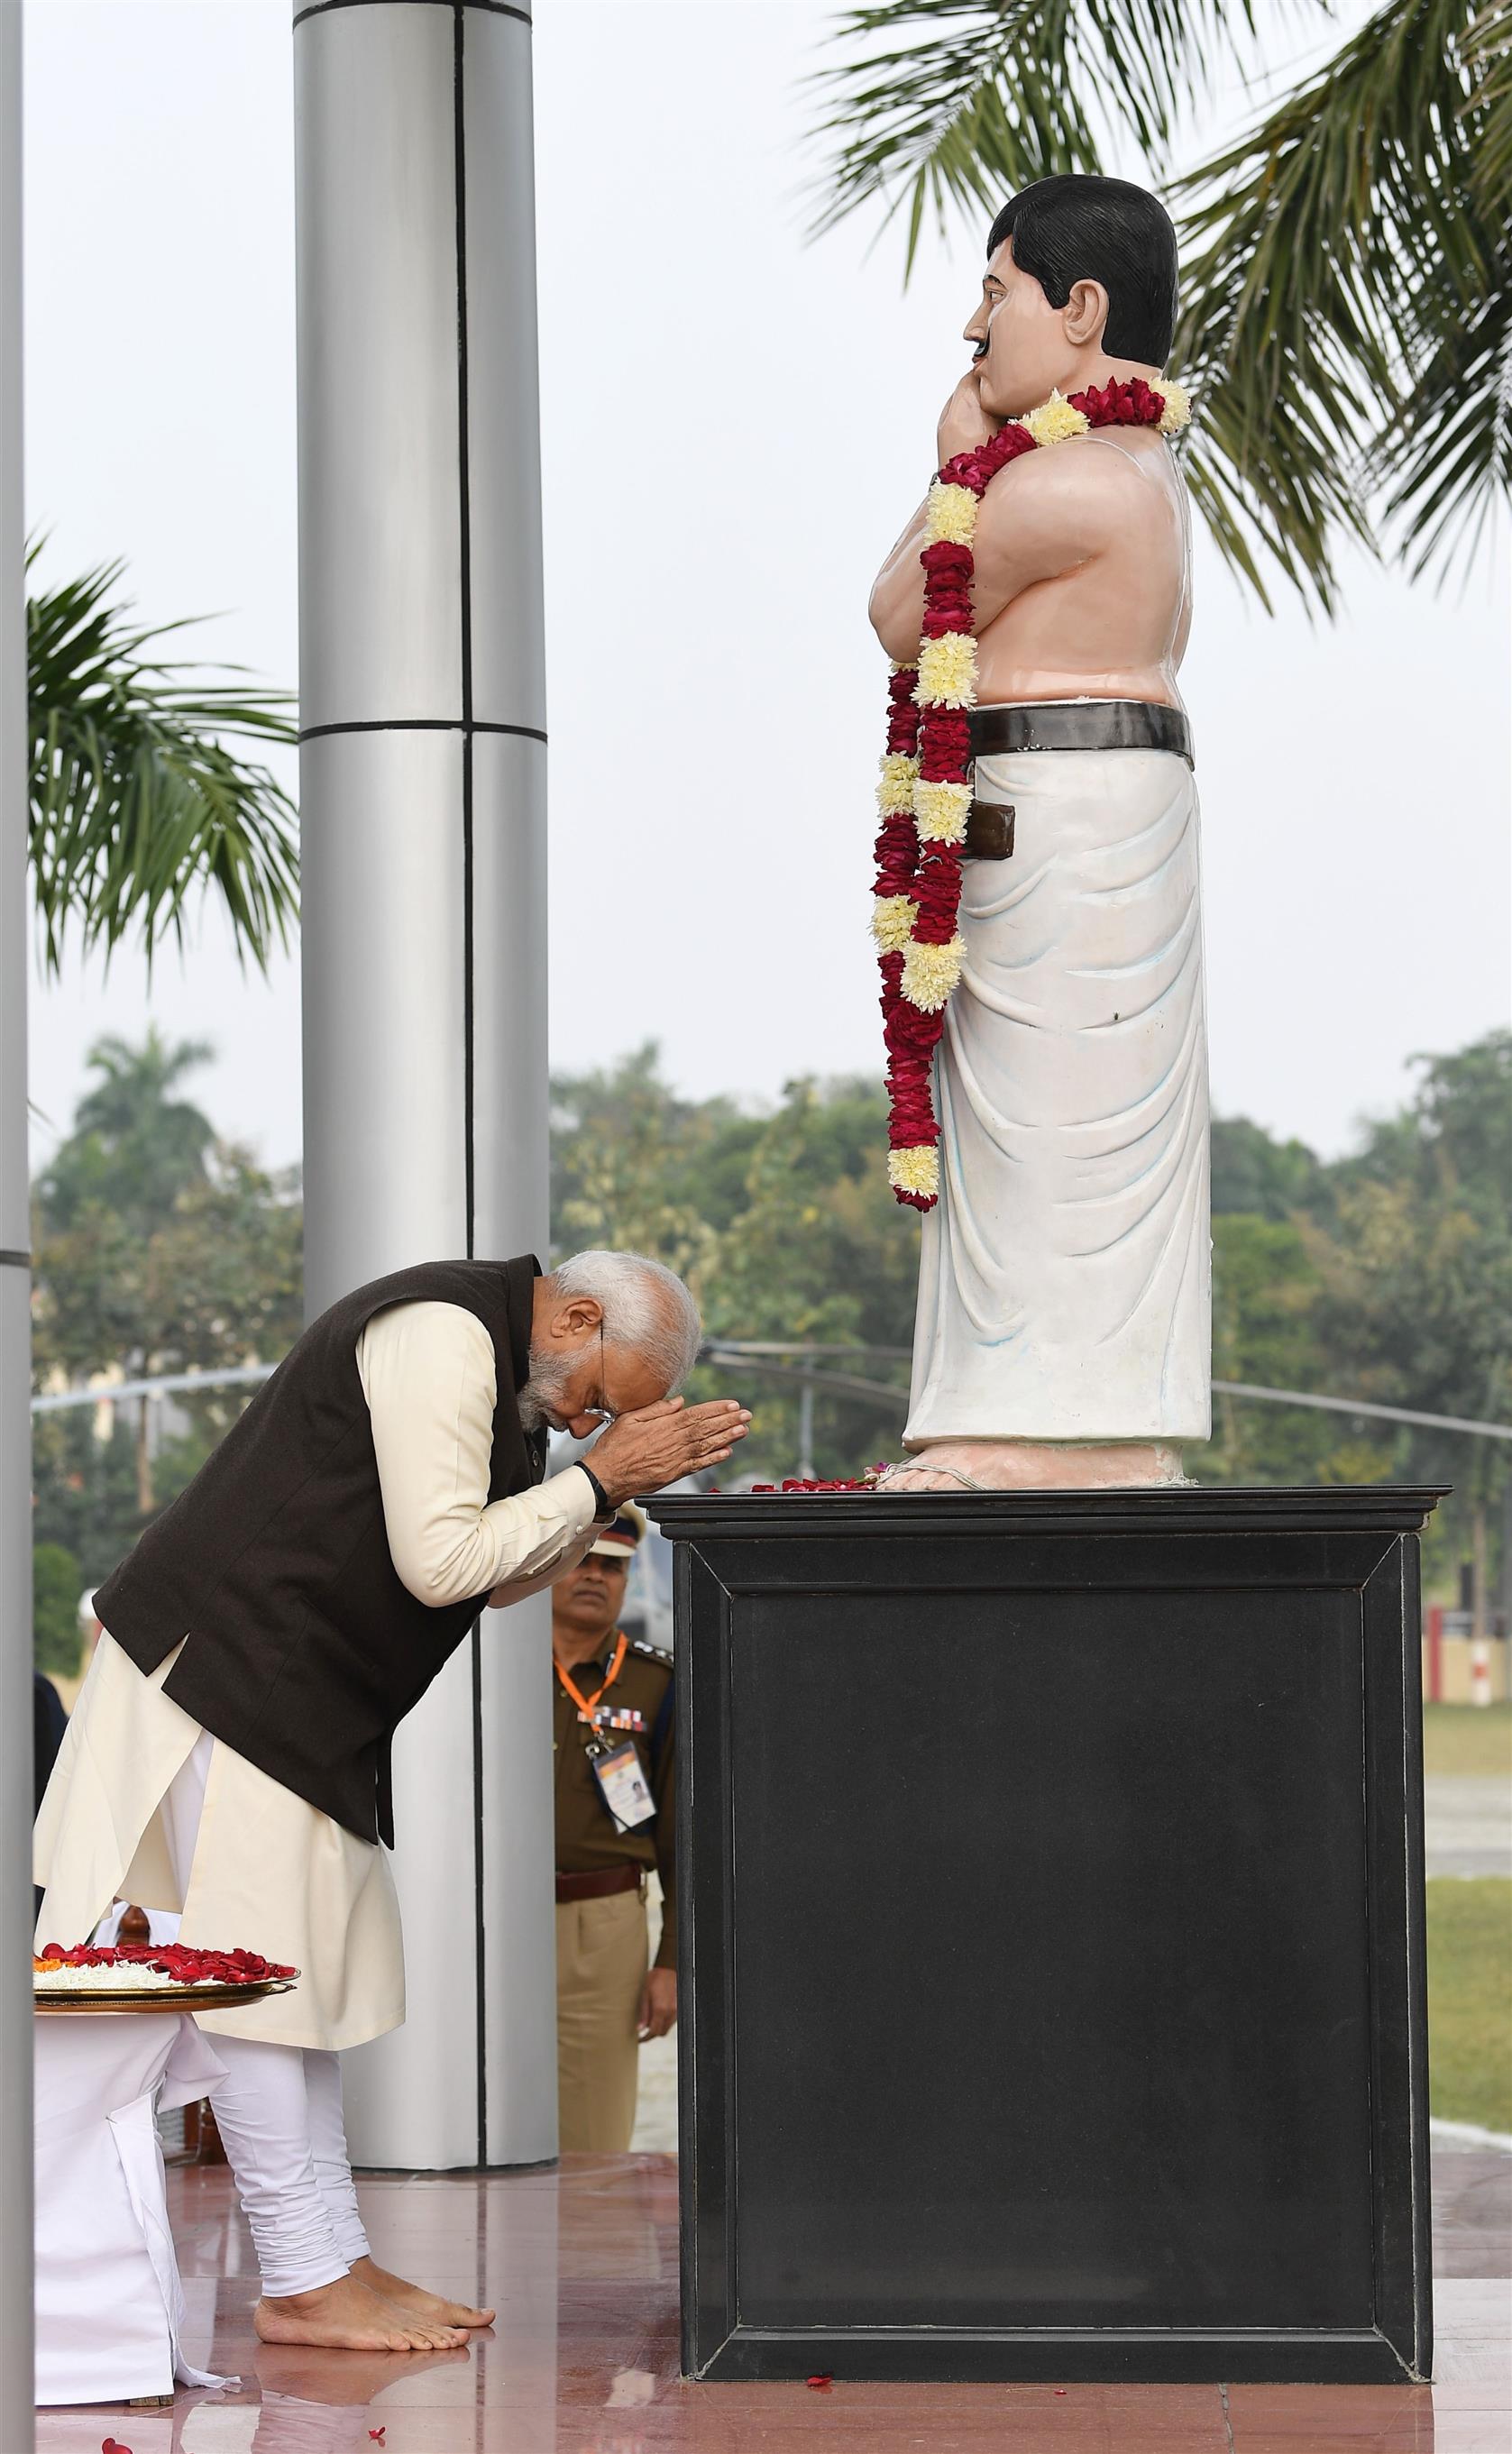 The Prime Minister, Shri Narendra Modi paying homage to the freedom fighter Chandra Shekhar Azad, in Kanpur on December 14, 2019.